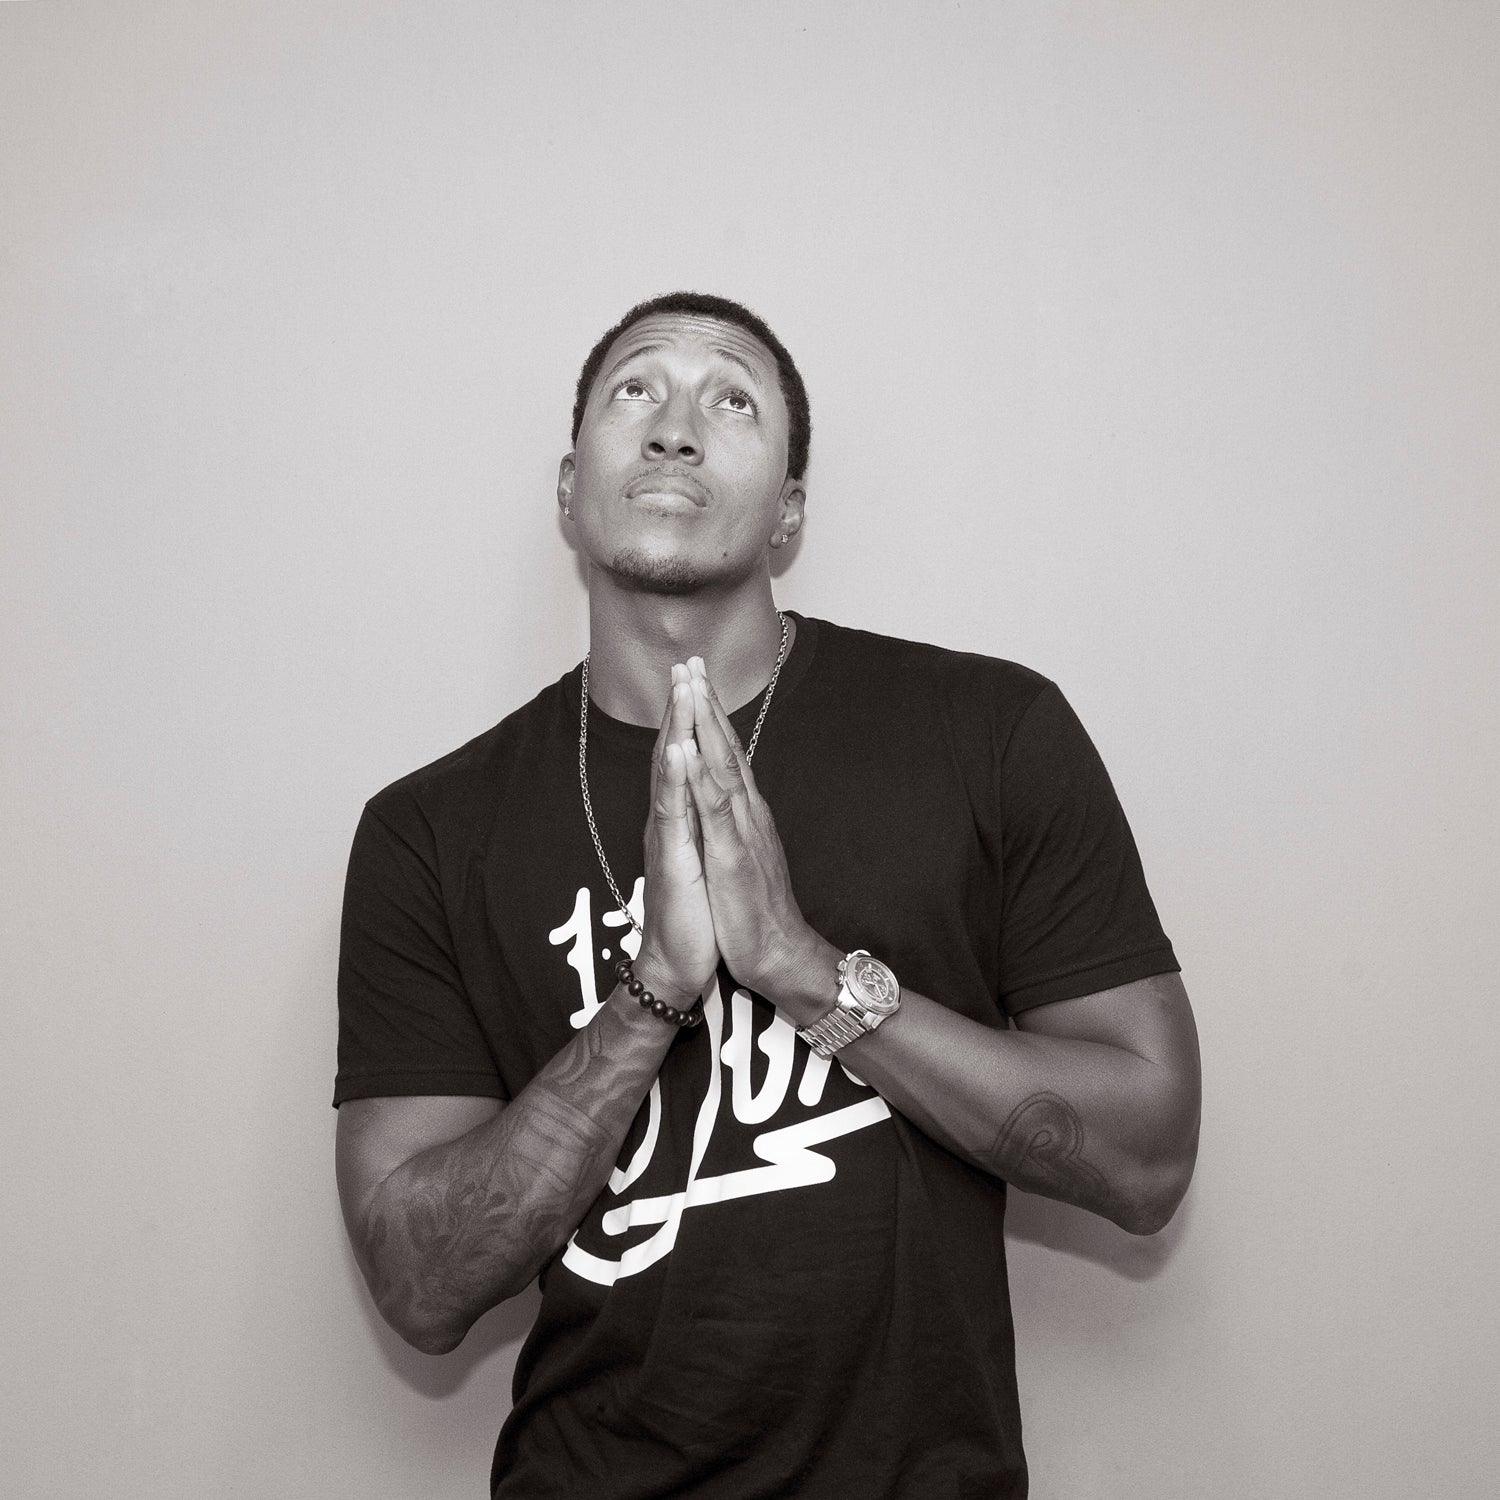 NOW PLAYING Artist, Lecrae Talks Keeping His Marriage First, His Faith & Dealing with the Pressure of Success